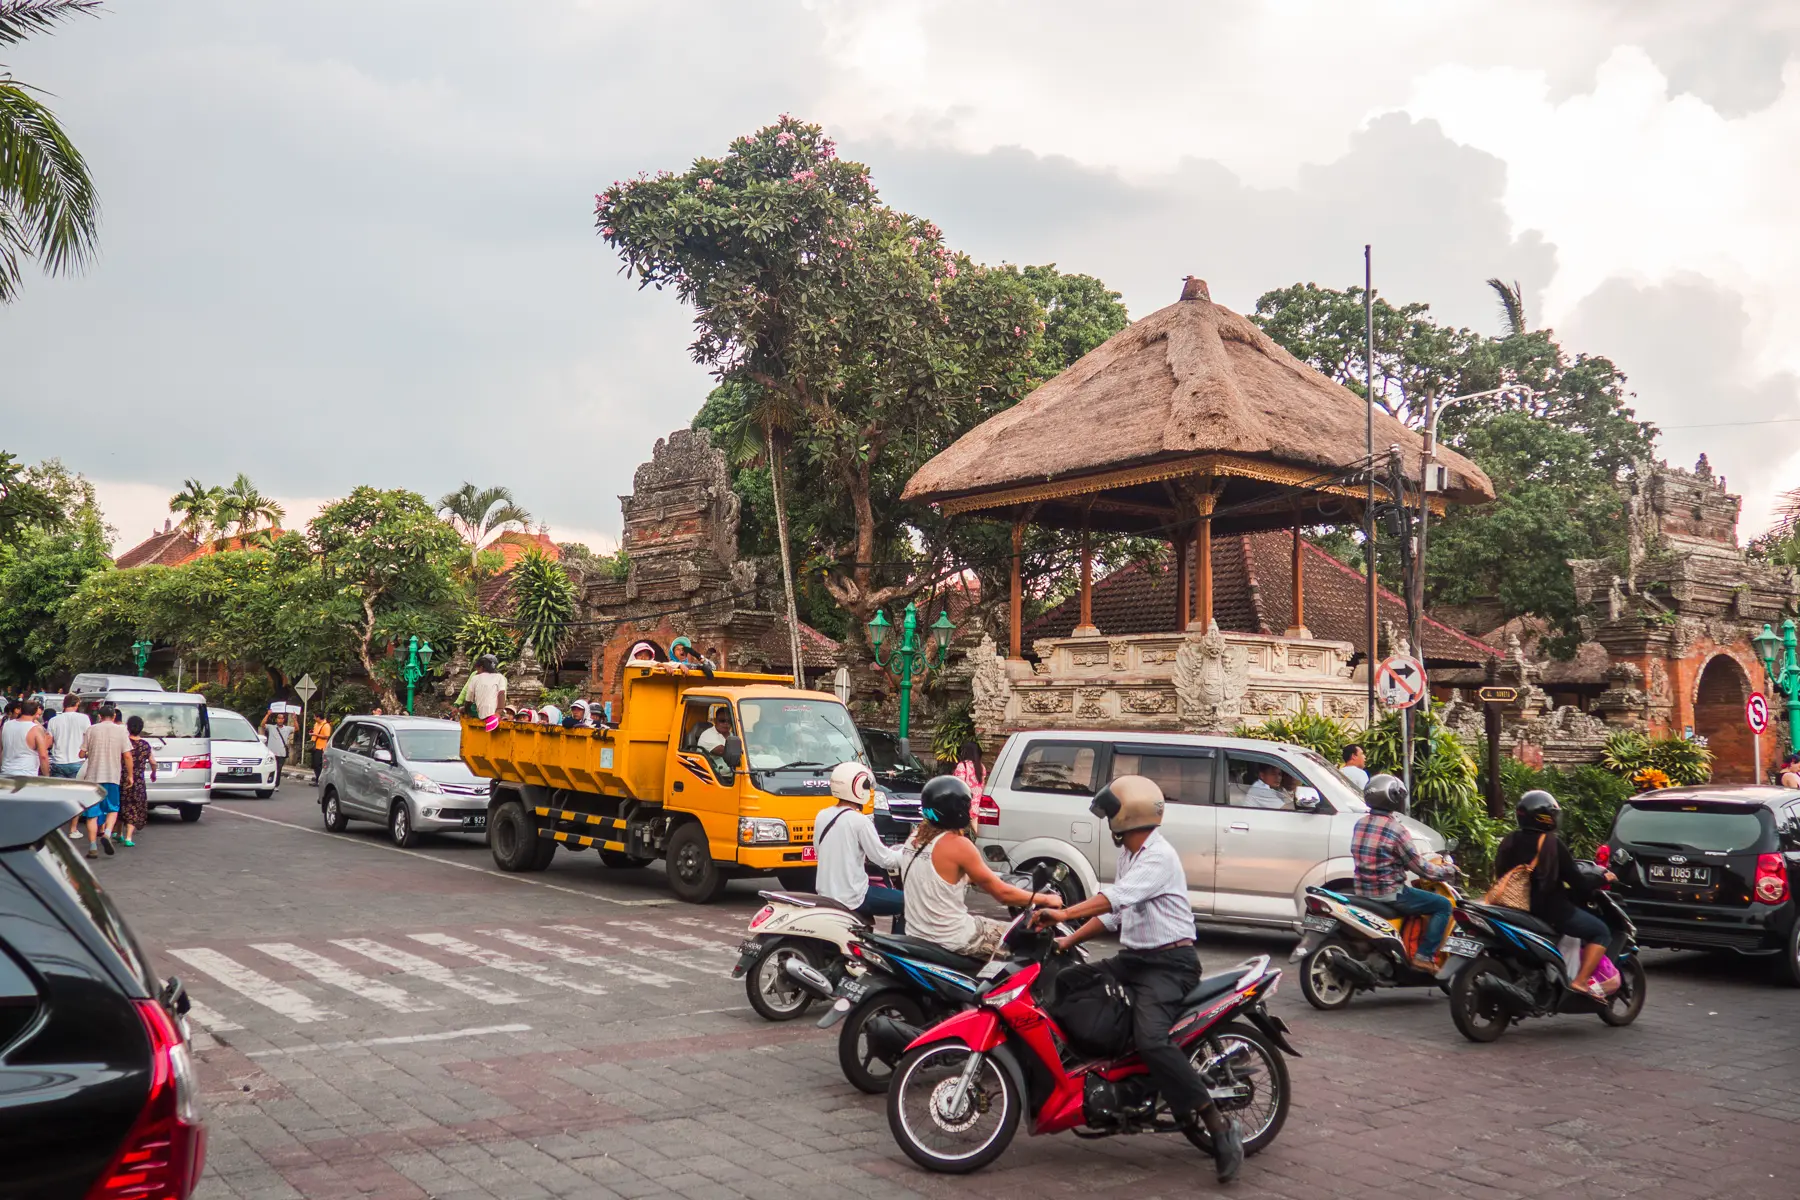 Intersection in Ubud Bali with scooters, trucks and cars on a cloudy day, things to know before going to Bali.